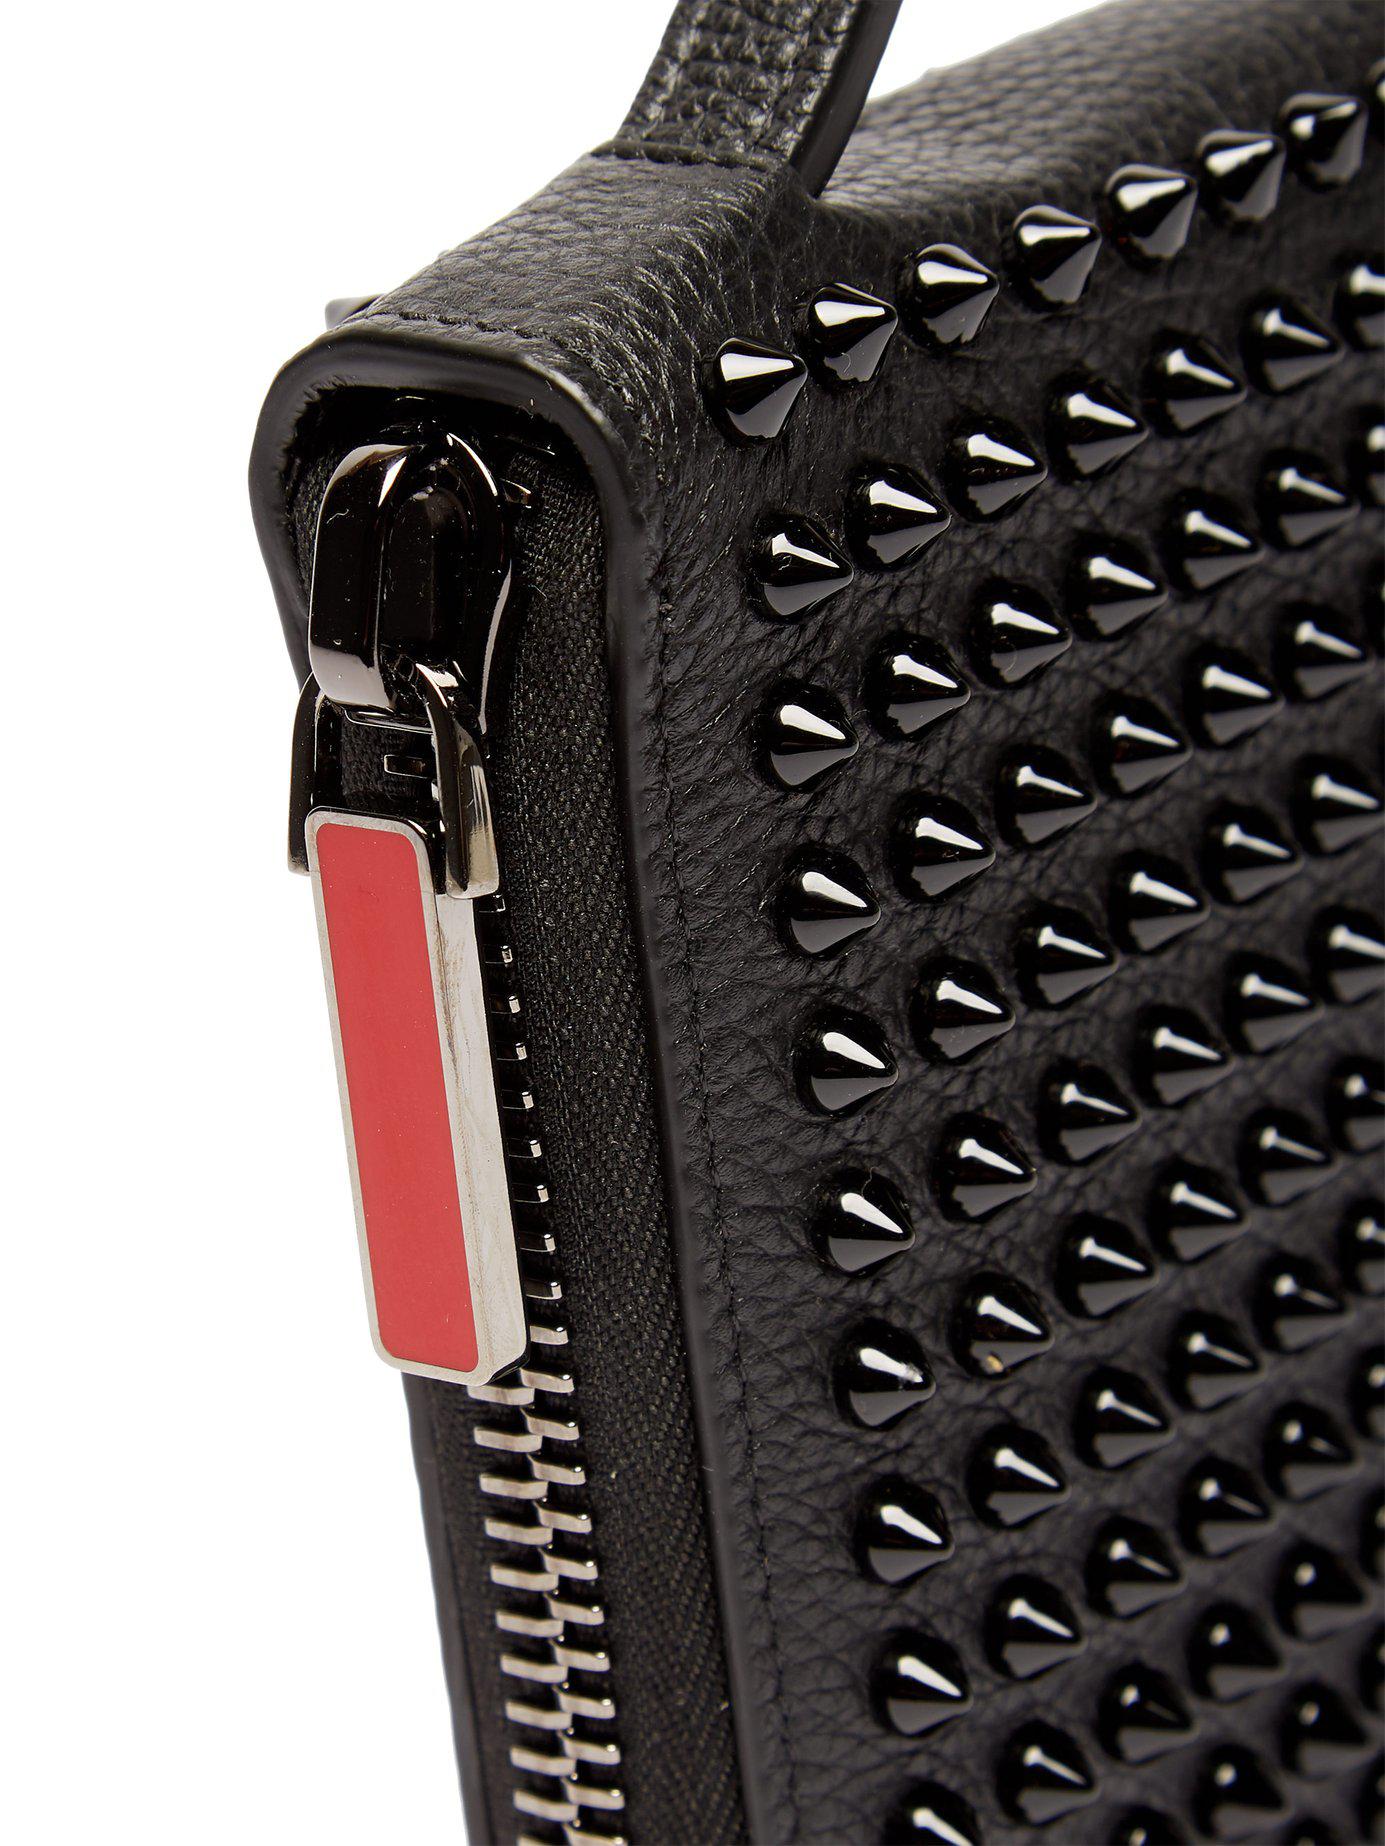 Christian Louboutin Leather Panettone Spikes Wallet (SHF-20684) – LuxeDH